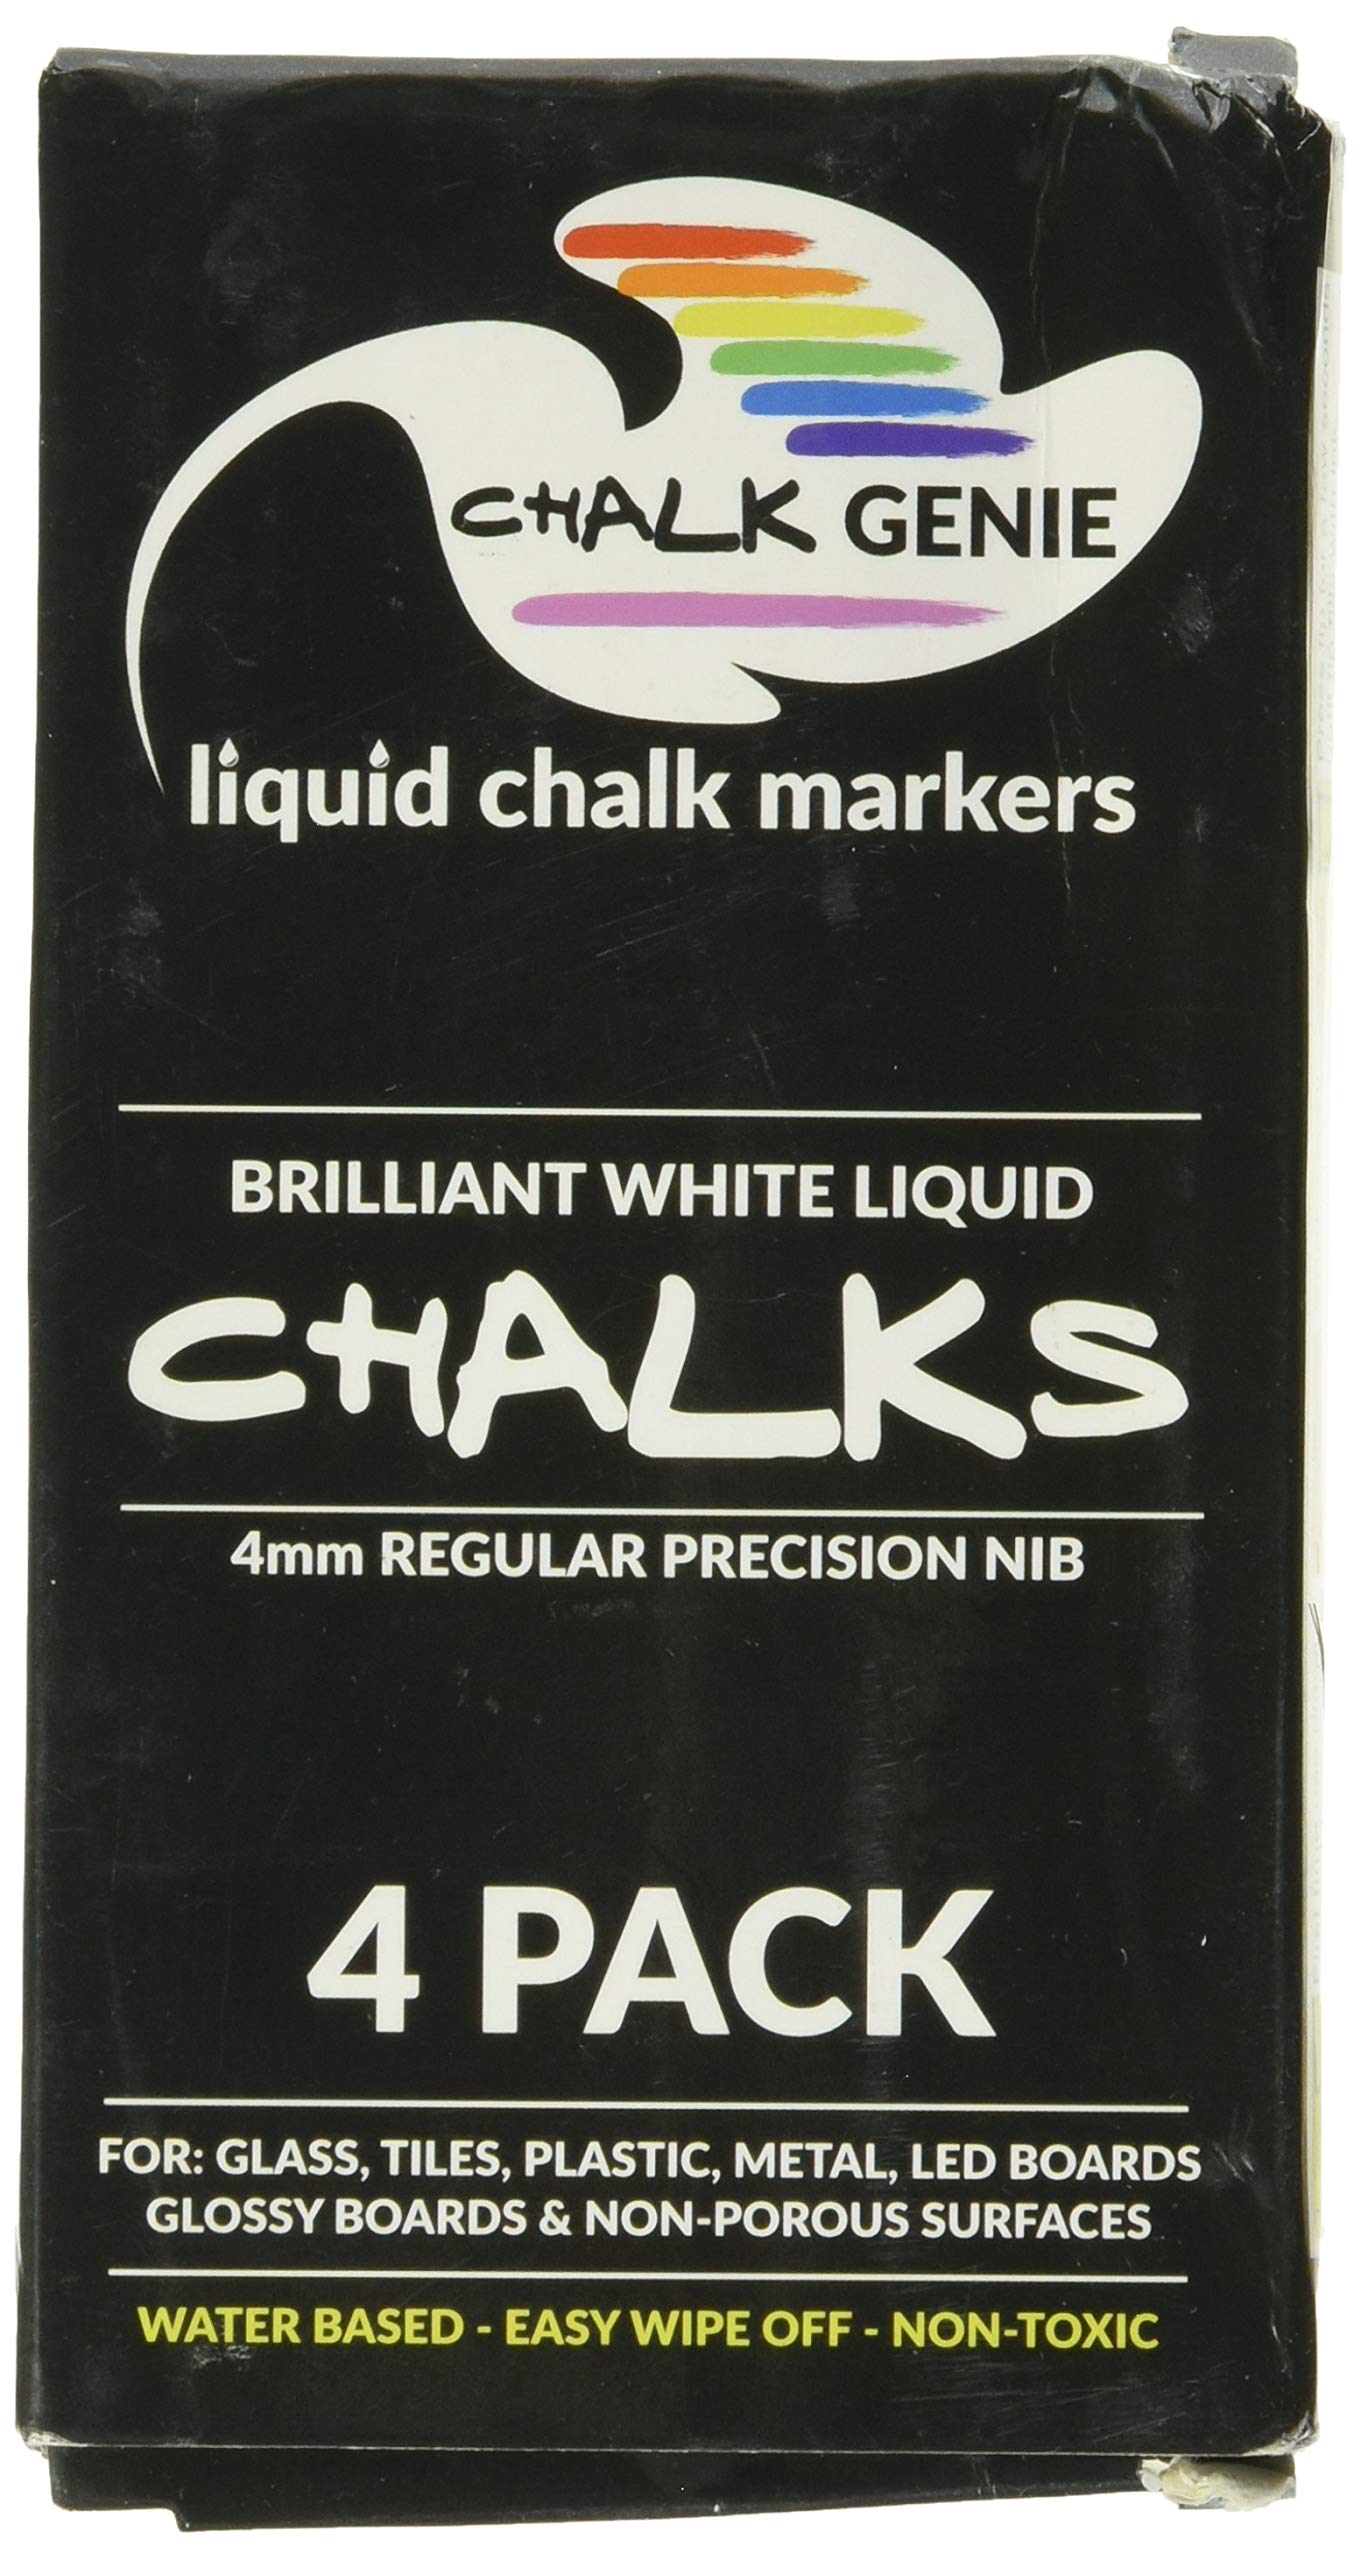 Book Cover CLEARANCE! Brilliant White Liquid Chalk Markers - 6mm Bullet and Chisel Reversible Point Tip - Pack of 4 - Premium Quality Chalk Marker Pens - NON-POROUS Surfaces - NOT FOR CHALKBOARDS